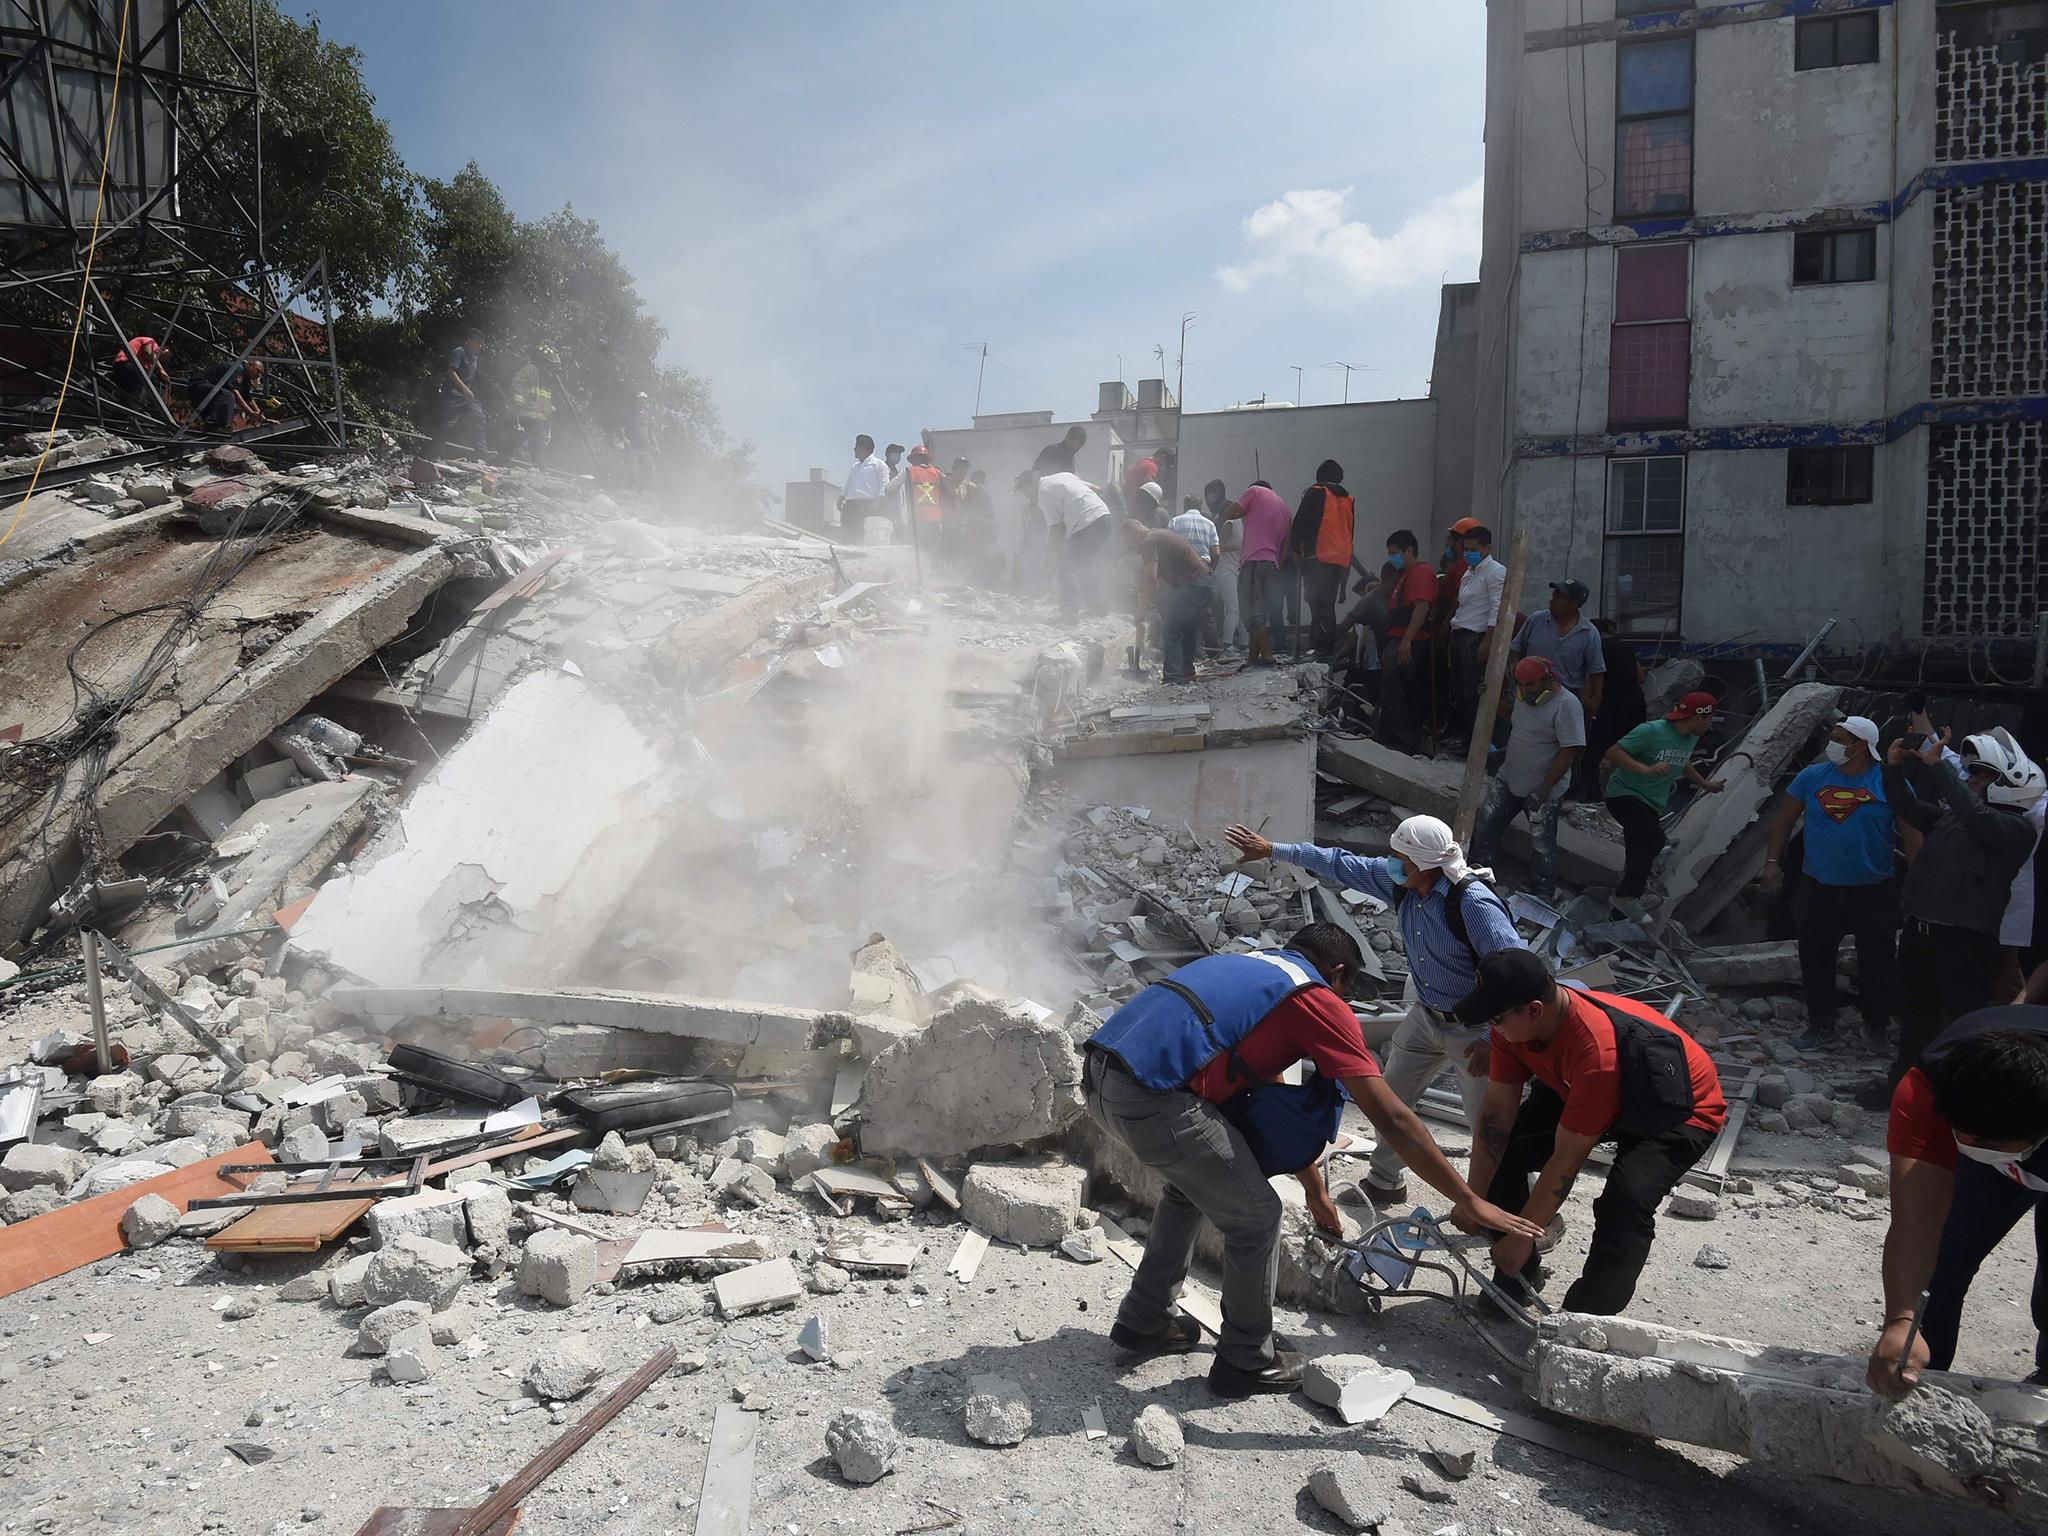 Rescuers have worked around the clock to pull survivors from the rubble